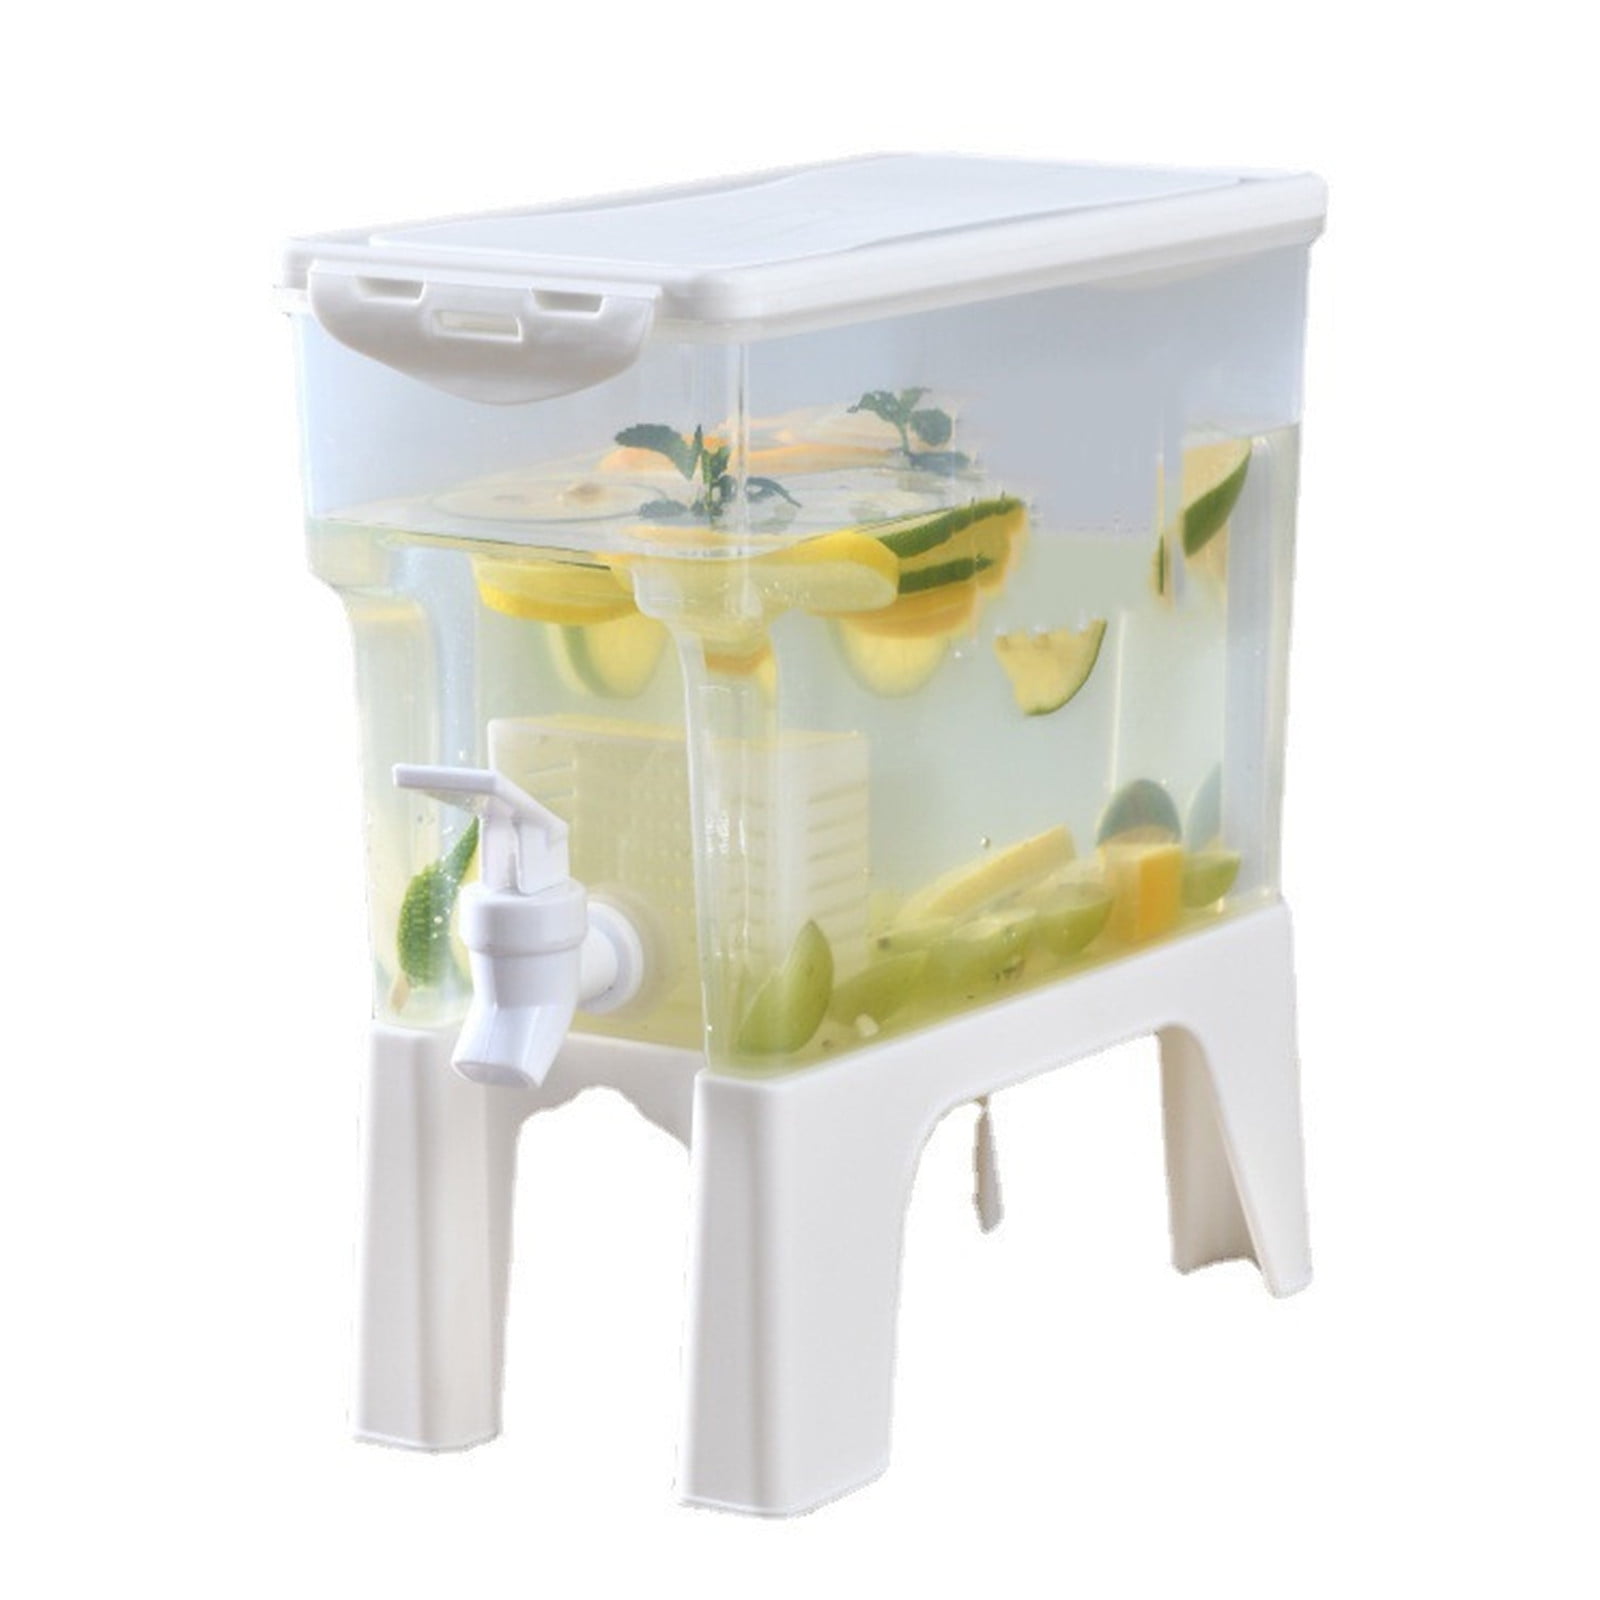 KWQBHW Beverage Dispenser with Spigot Rotate 360 Degrees Drink  Dispenser for Parties 4 Compartment Refrigerator Ice Fruit Juice Lemonade  Container, 1.5 Gallon: Iced Beverage Dispensers